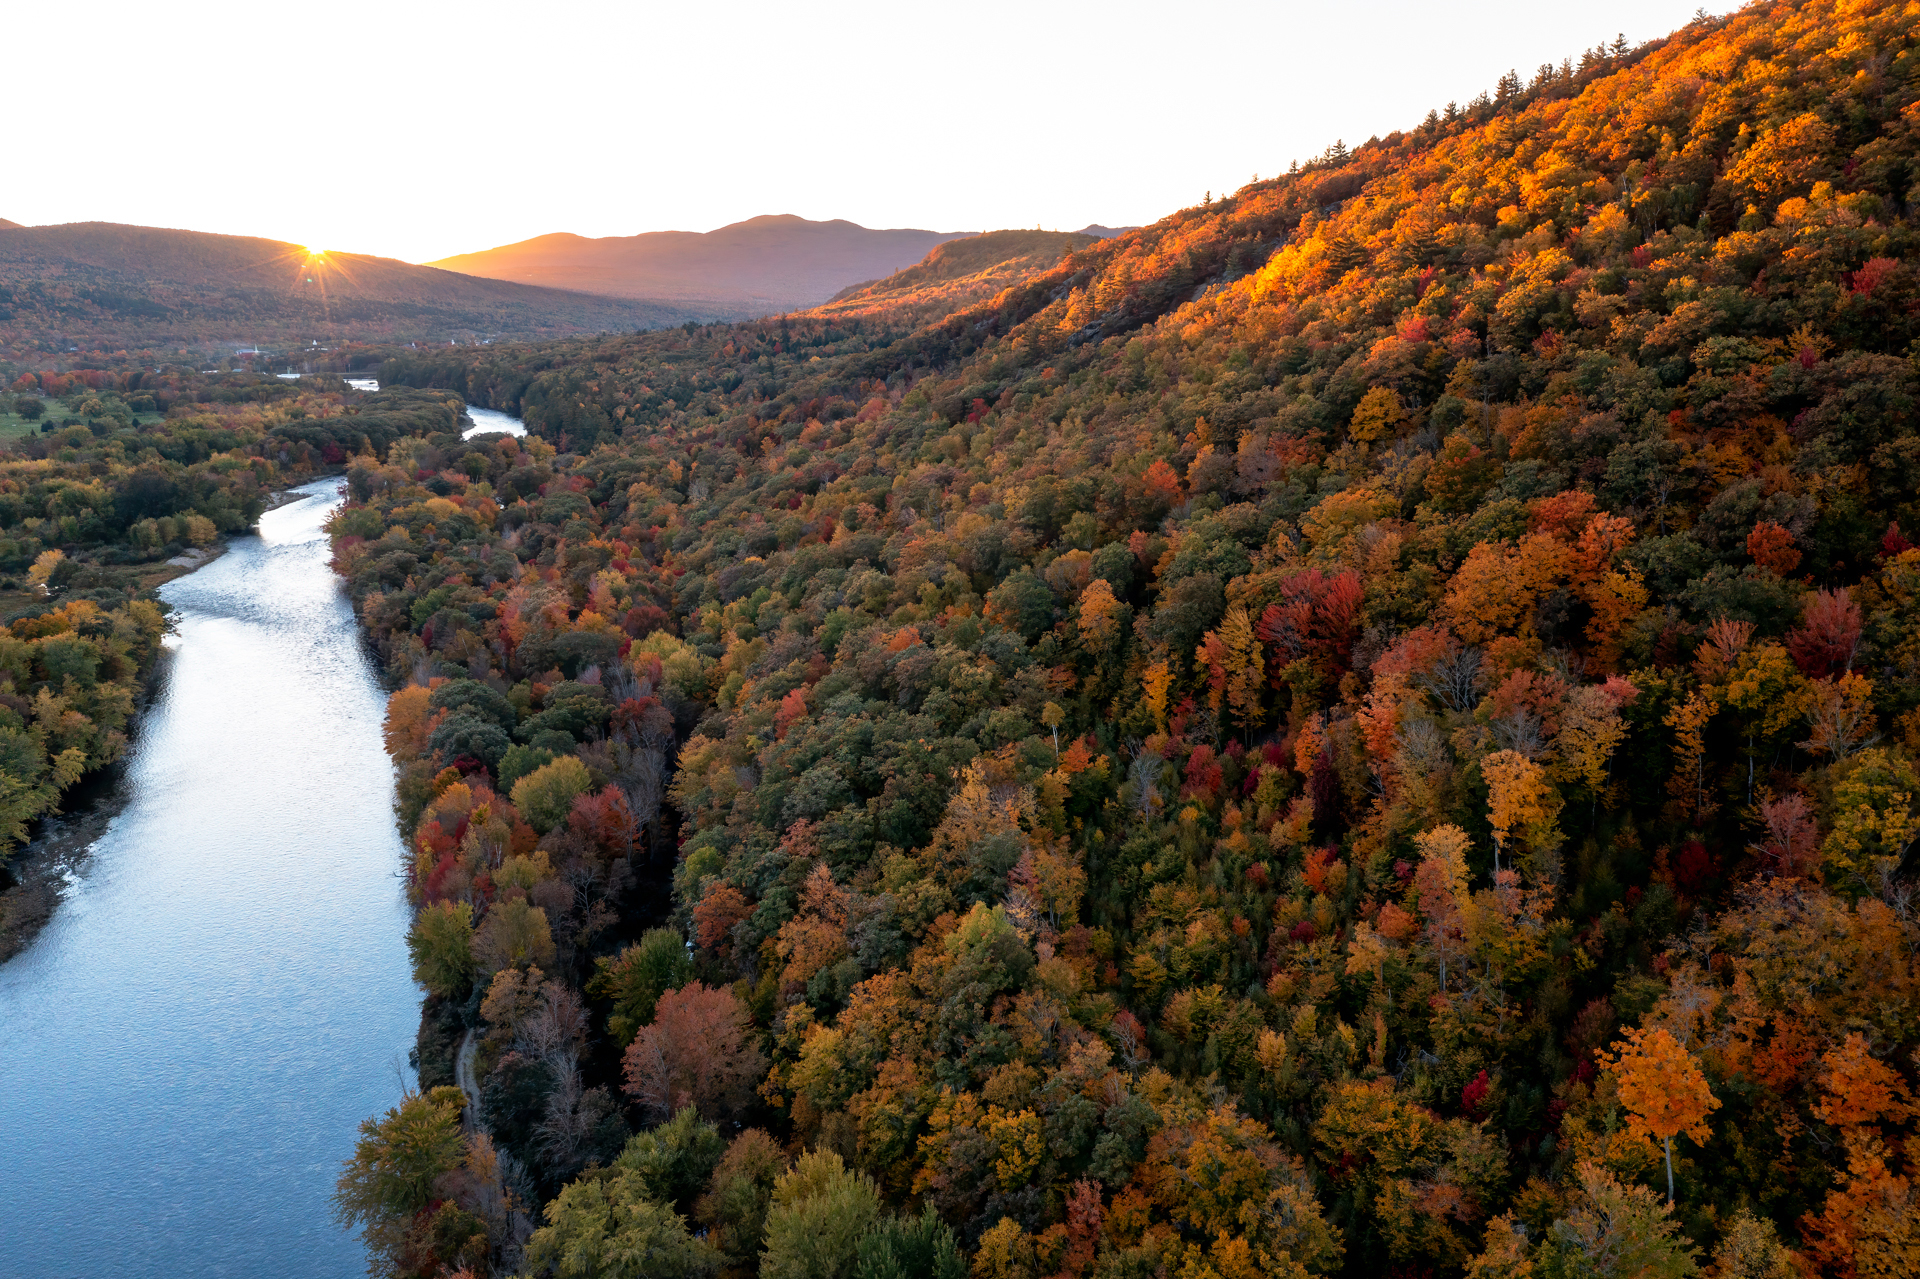 A birds eye view of the Mahoosuc Highlands in autumn.